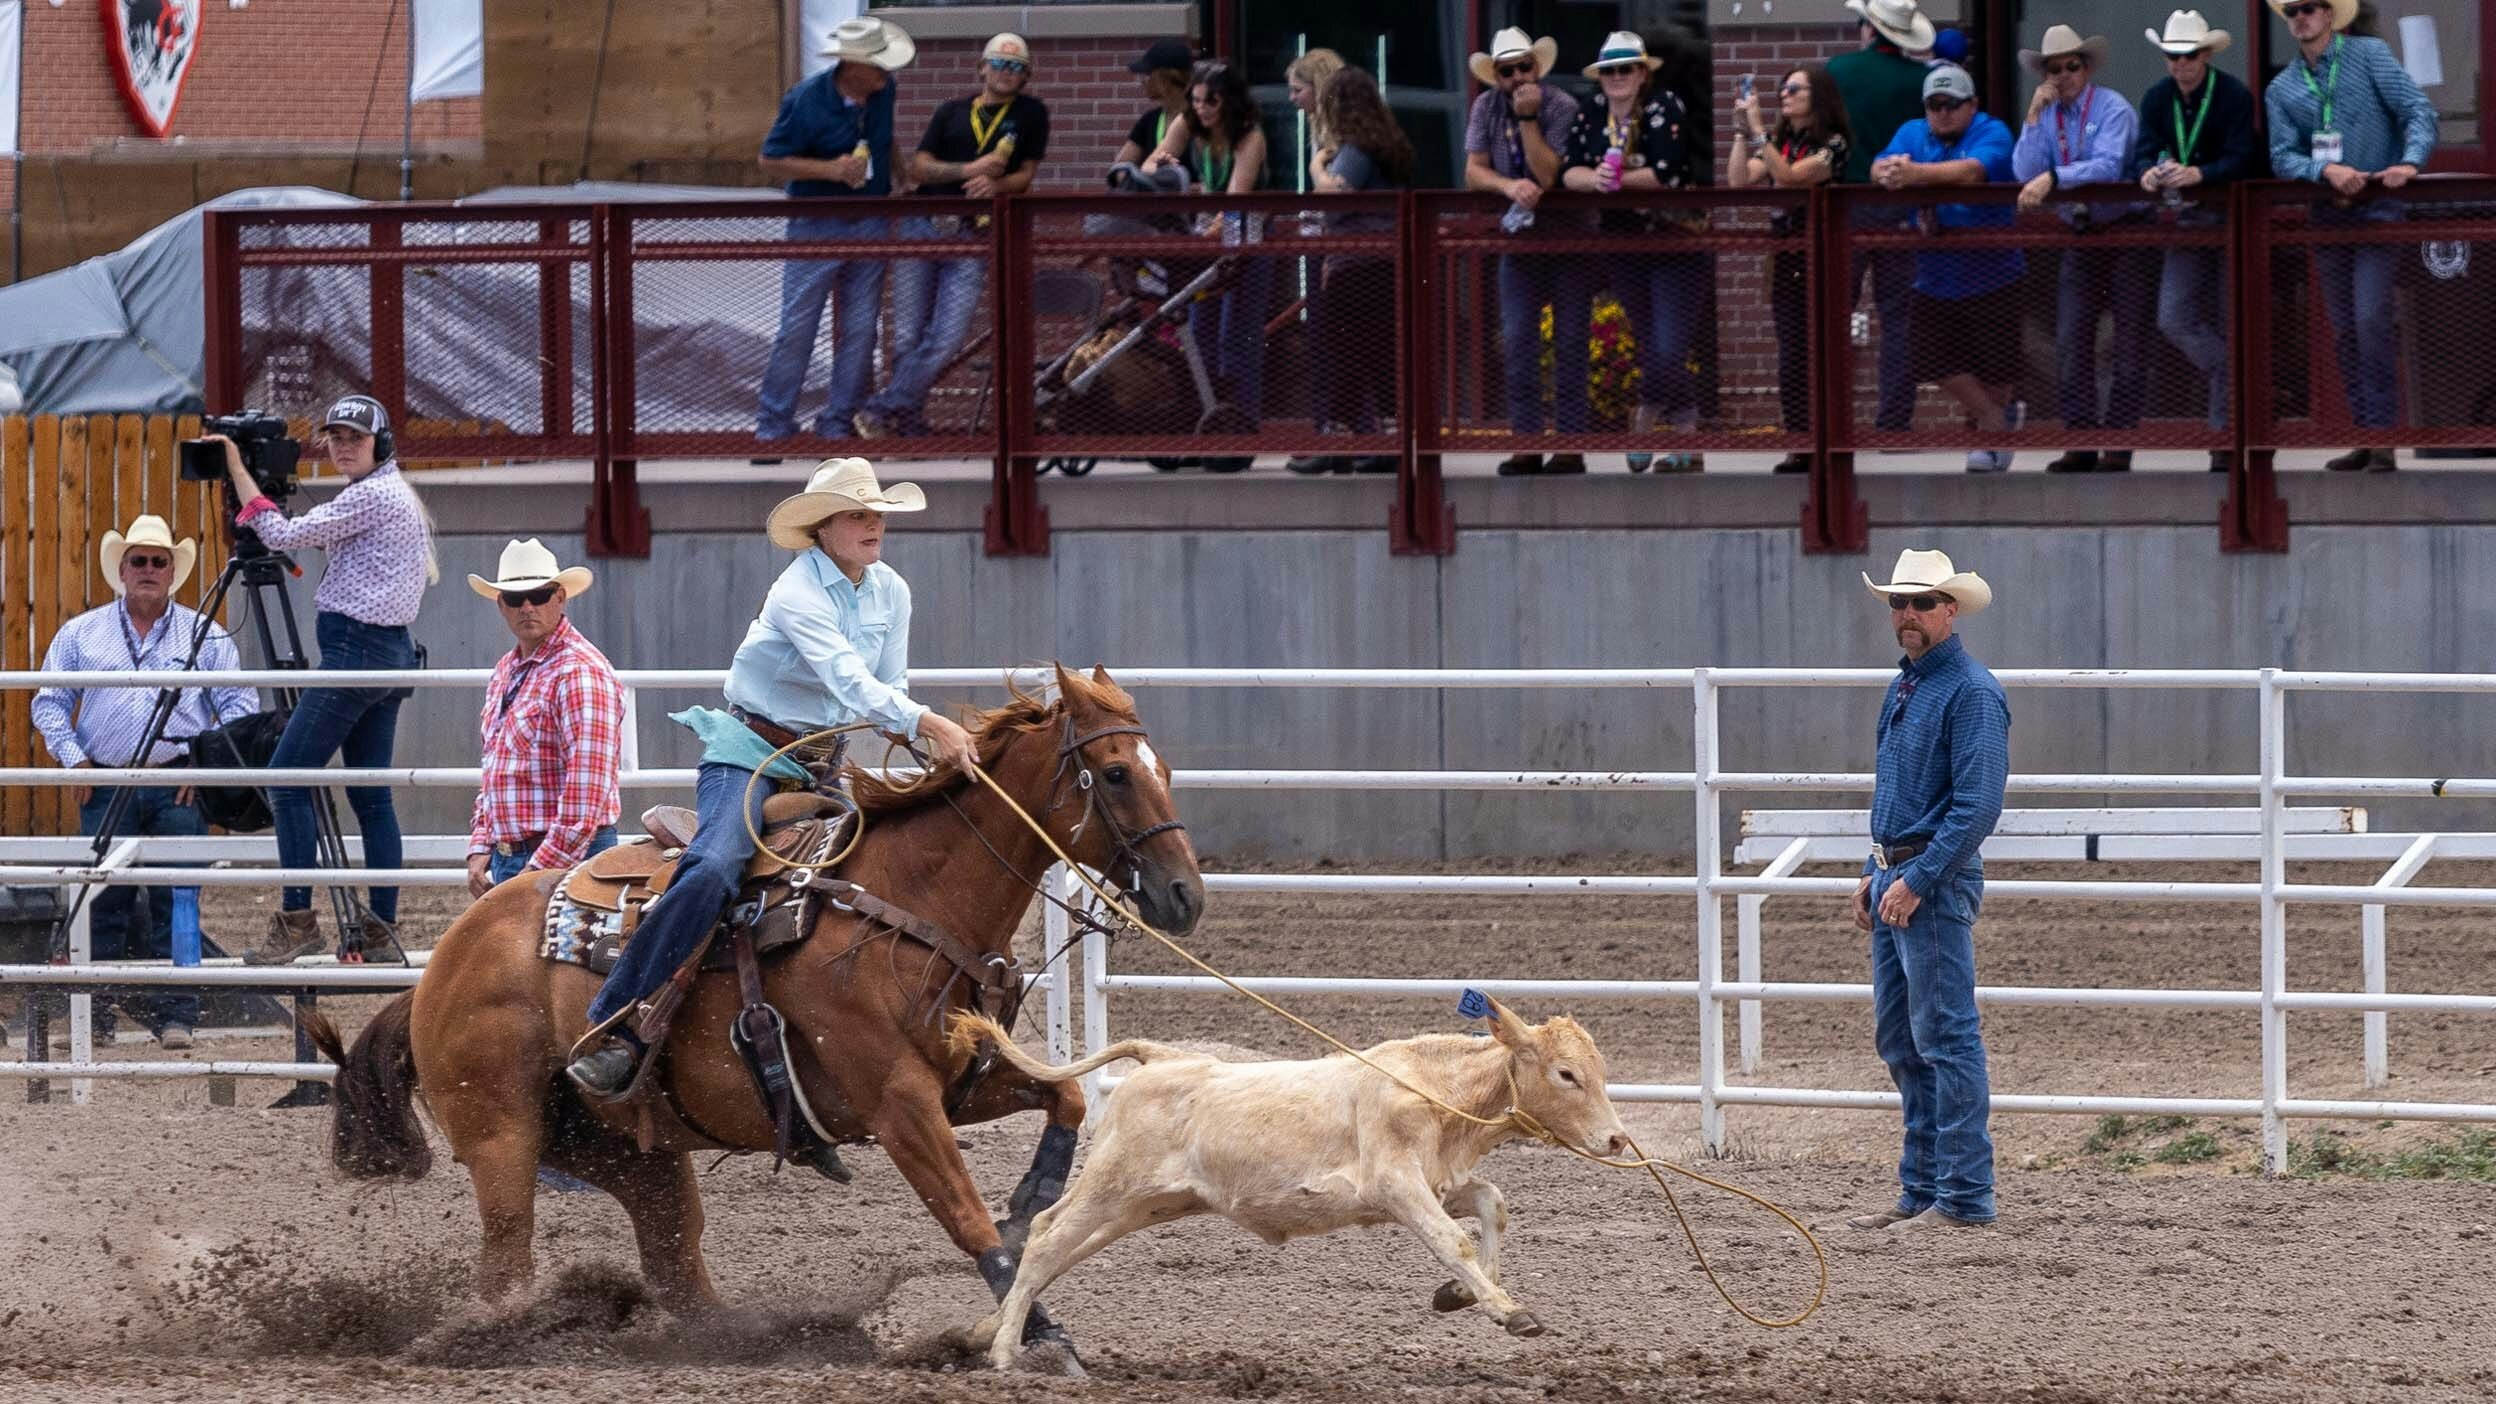 Brandy Schaack from Chadron, NE ropes her calf in 4.4 seconds to have the 4th fastest time on Championship Sunday at Cheyenne Frontier Days on July 30, 2023.